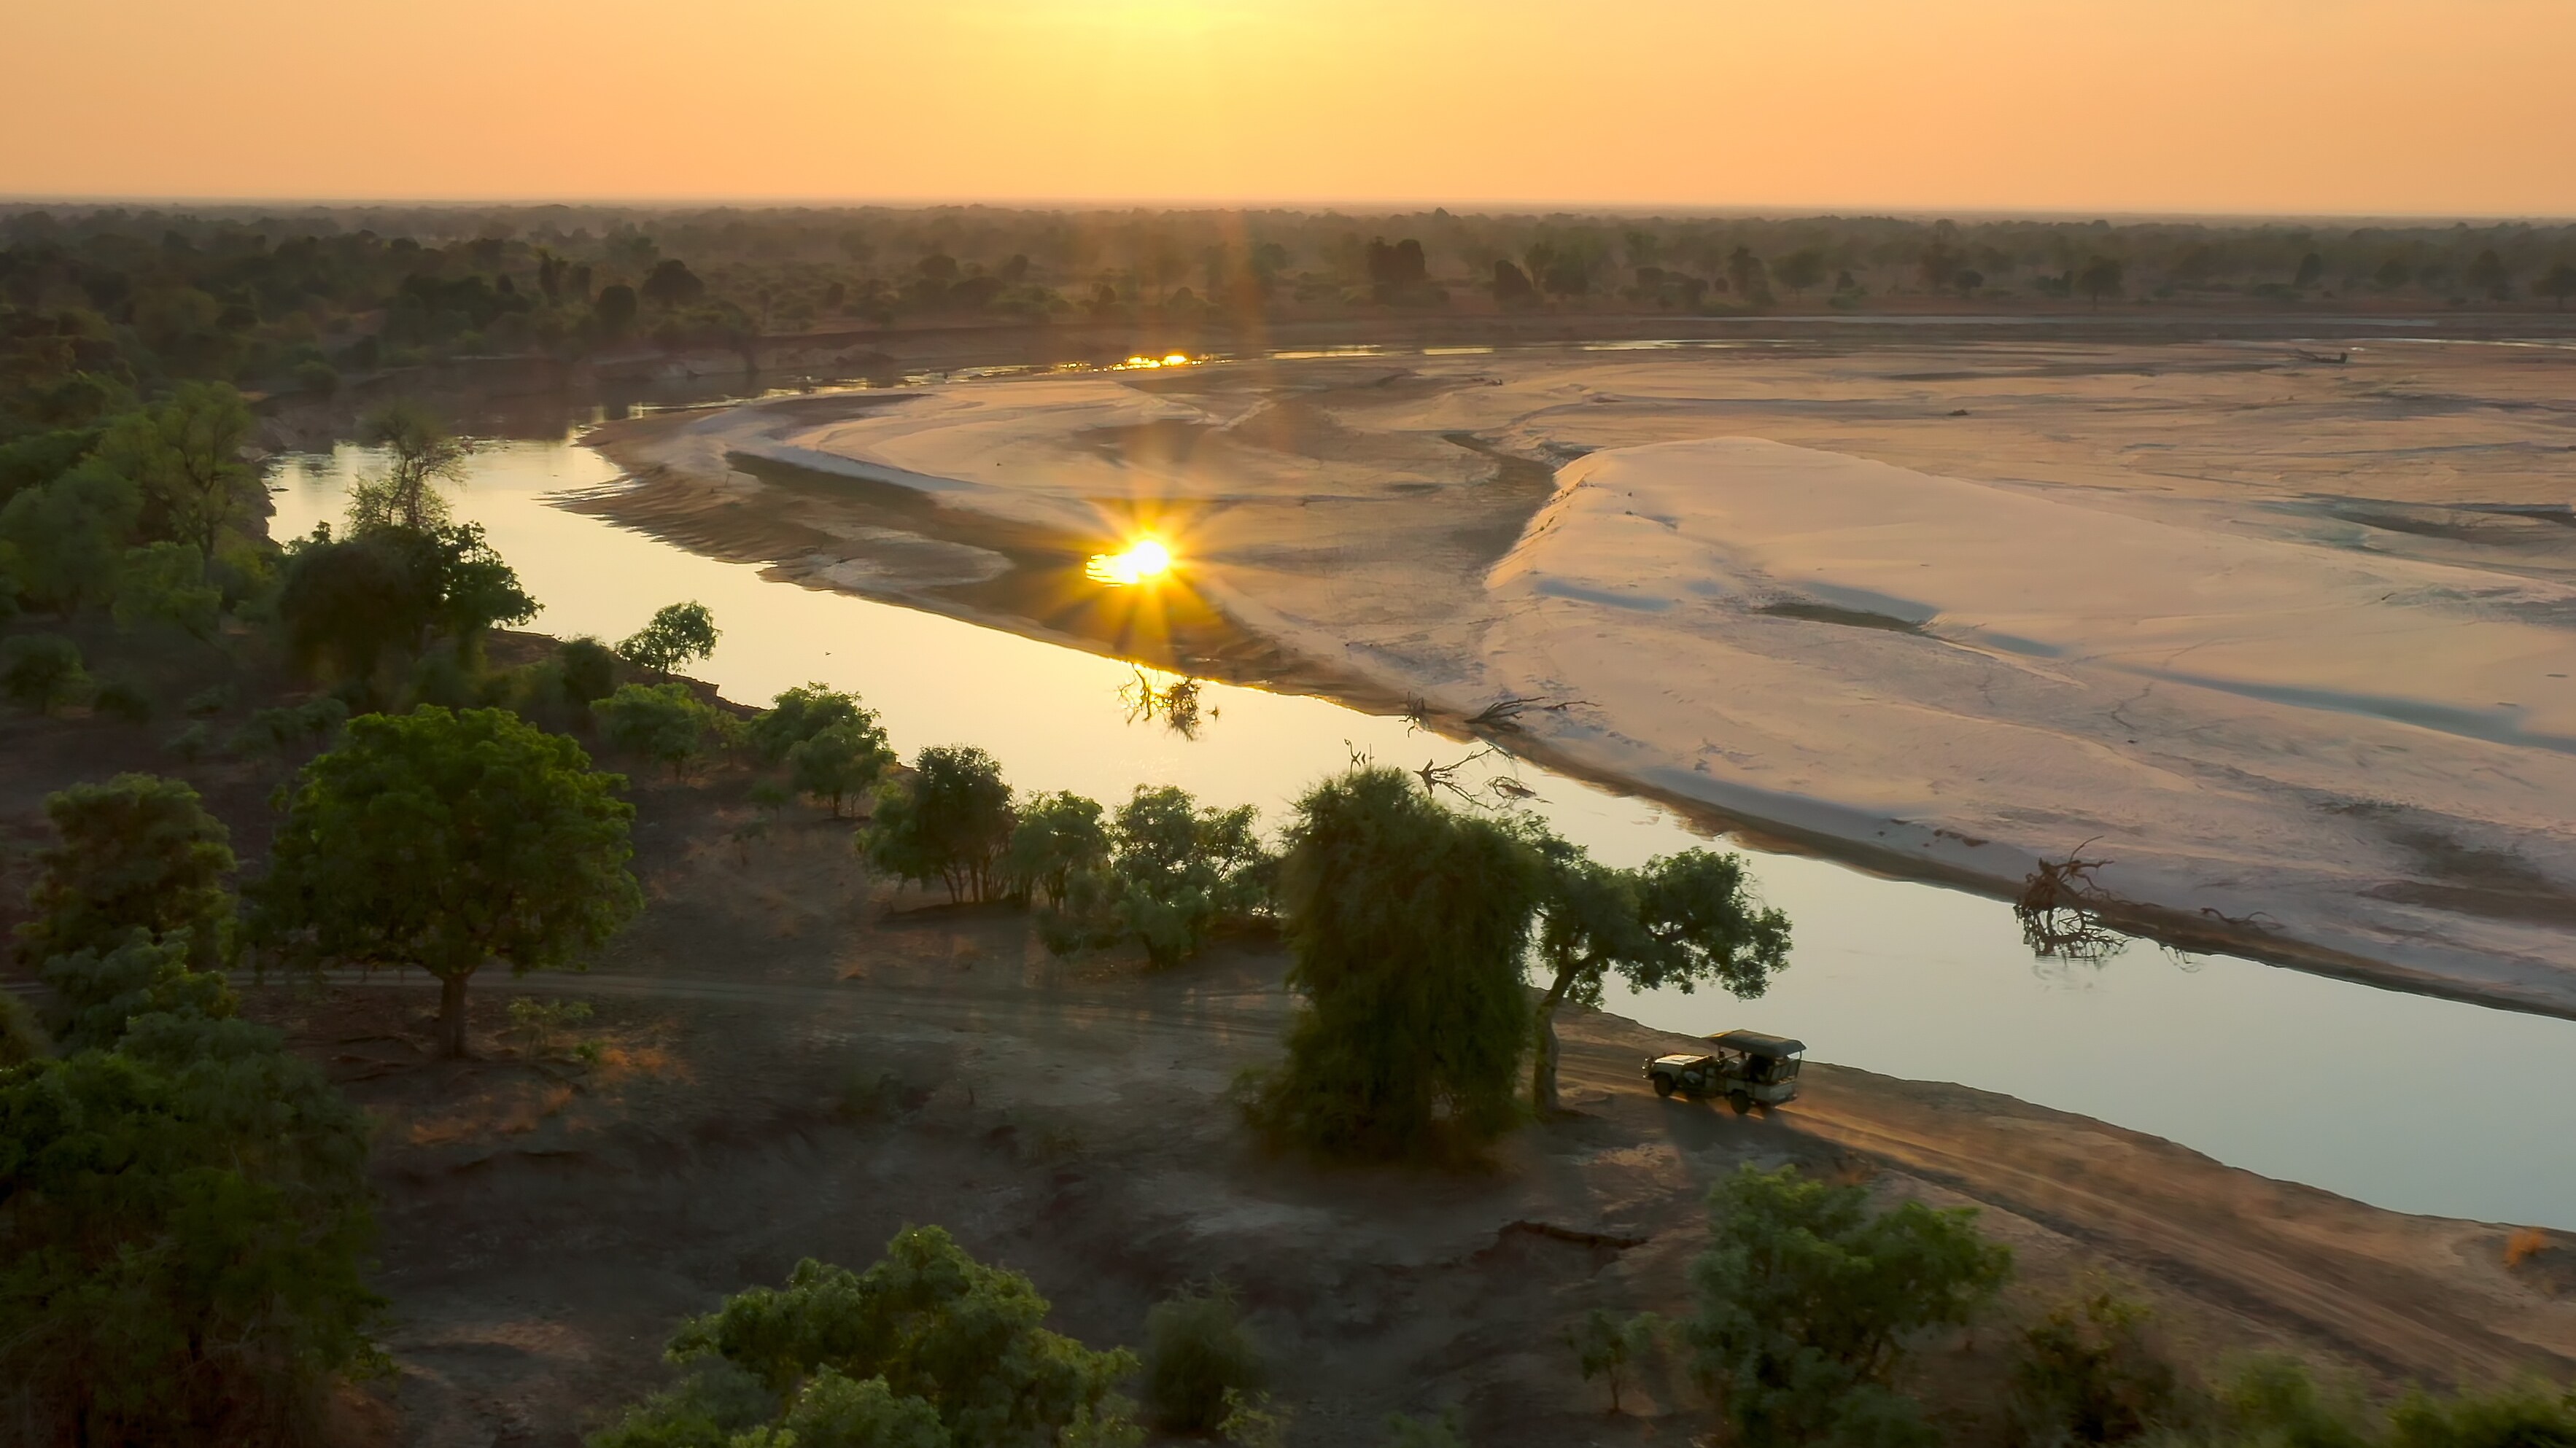 View of the the Luangwa River at sunset. (Credit: National Geographic/Bertie Gregory for Disney+)